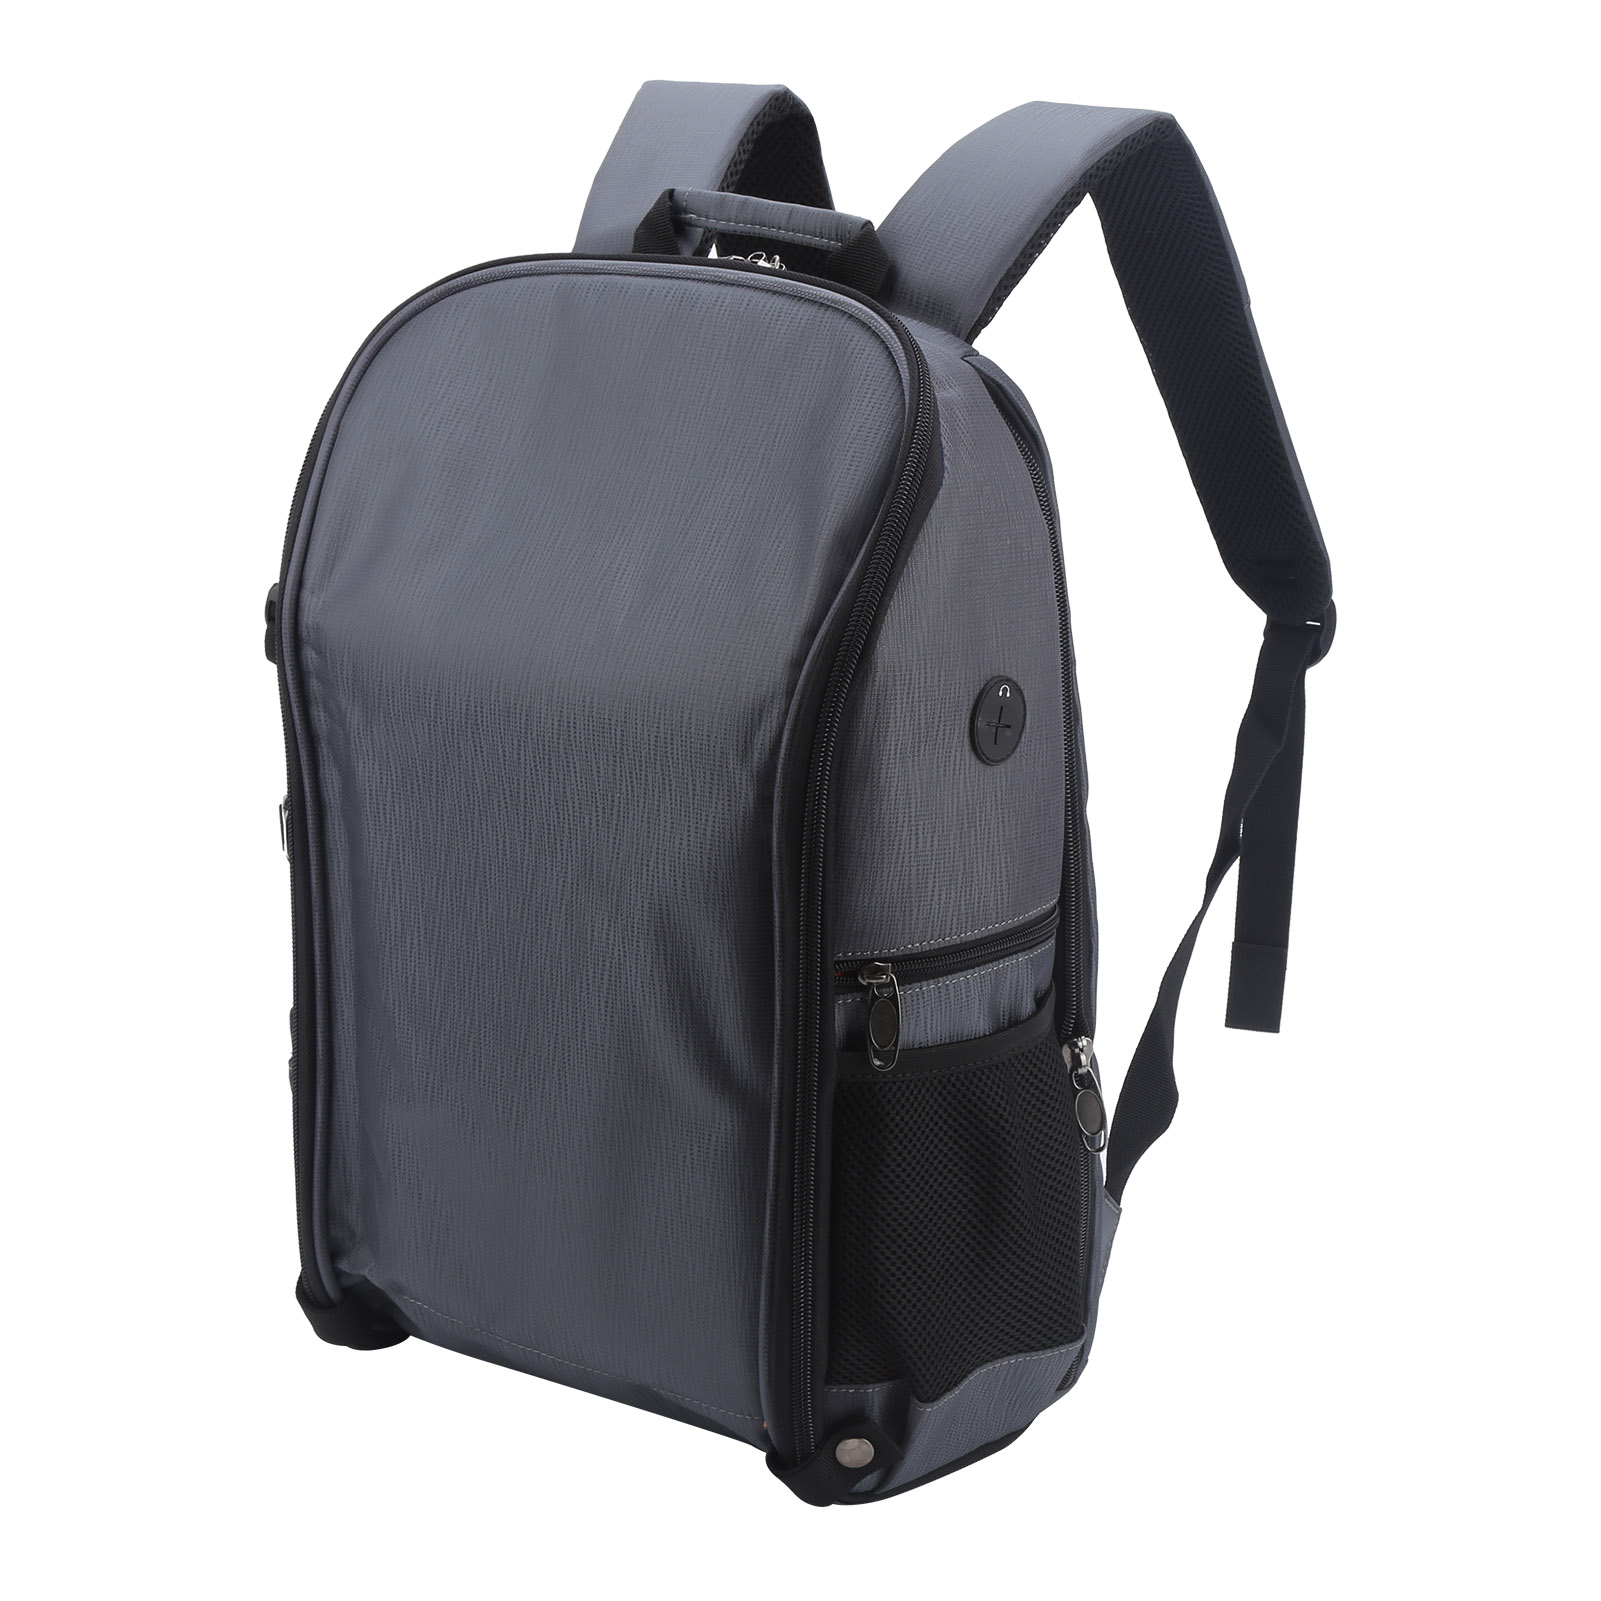 Nylon Drone Camera Backpack with Flexible Dividers